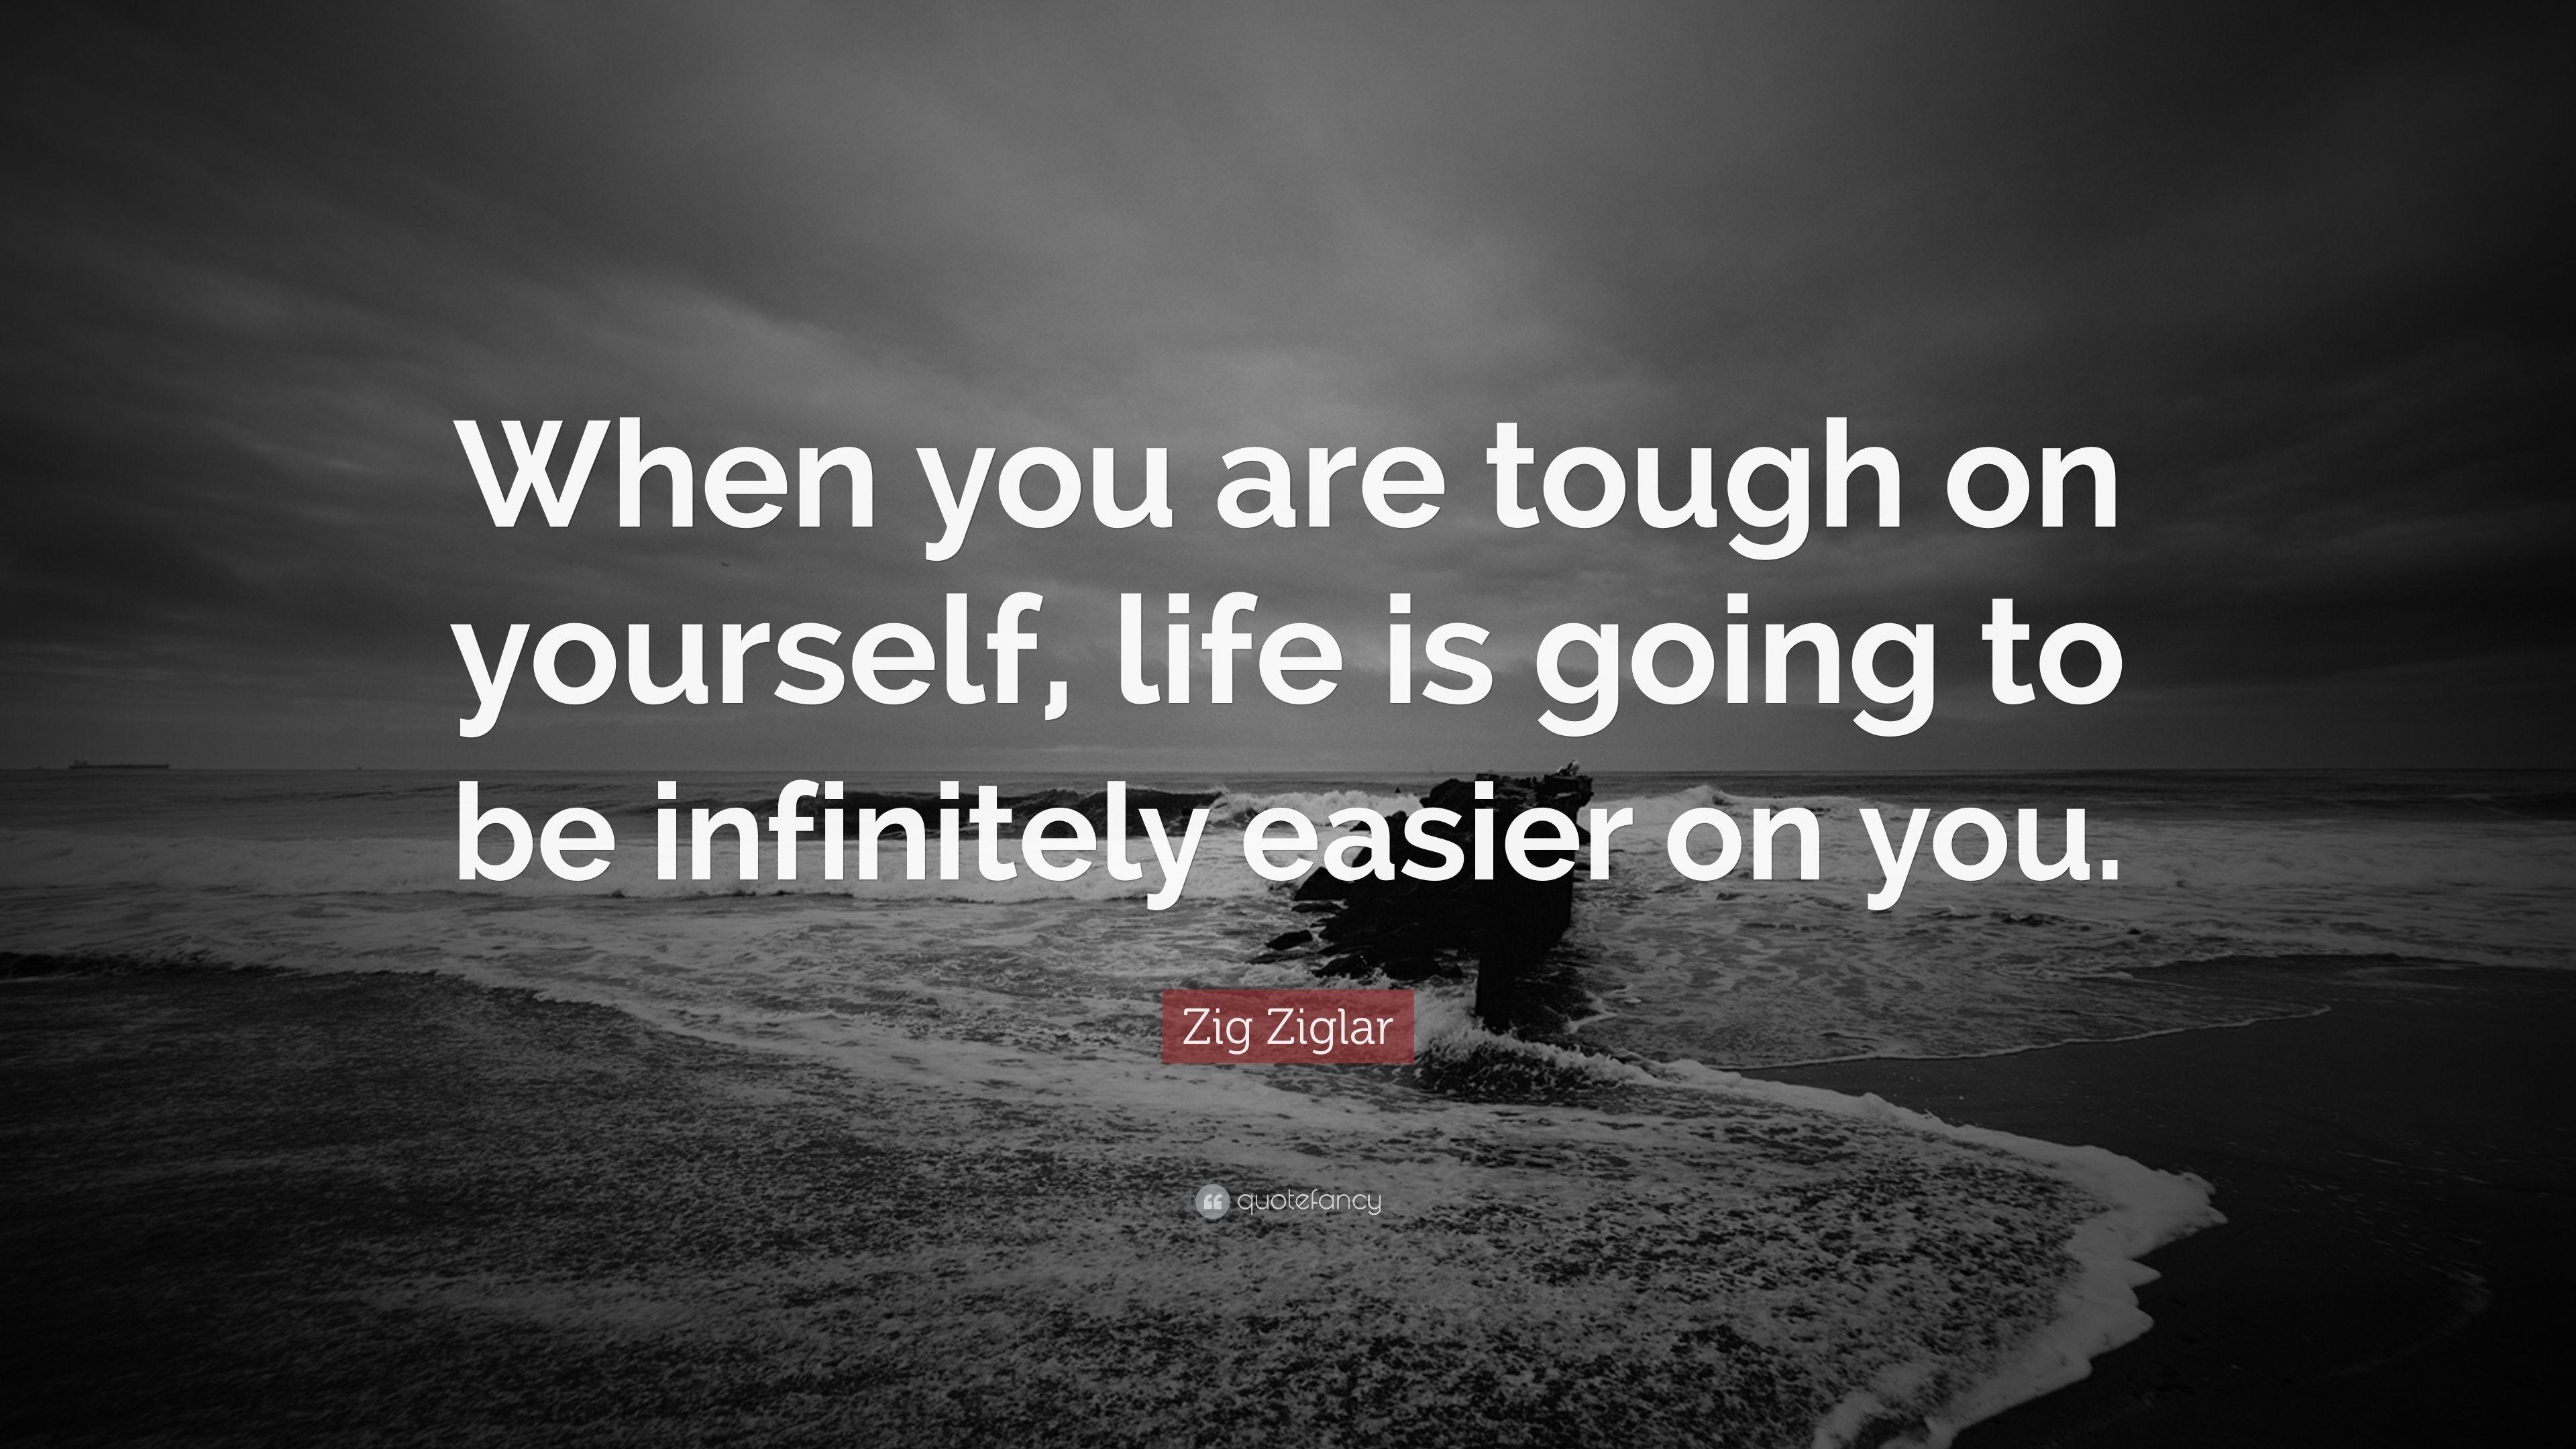 Zig Ziglar Quote: “When you are tough on yourself, life is going to